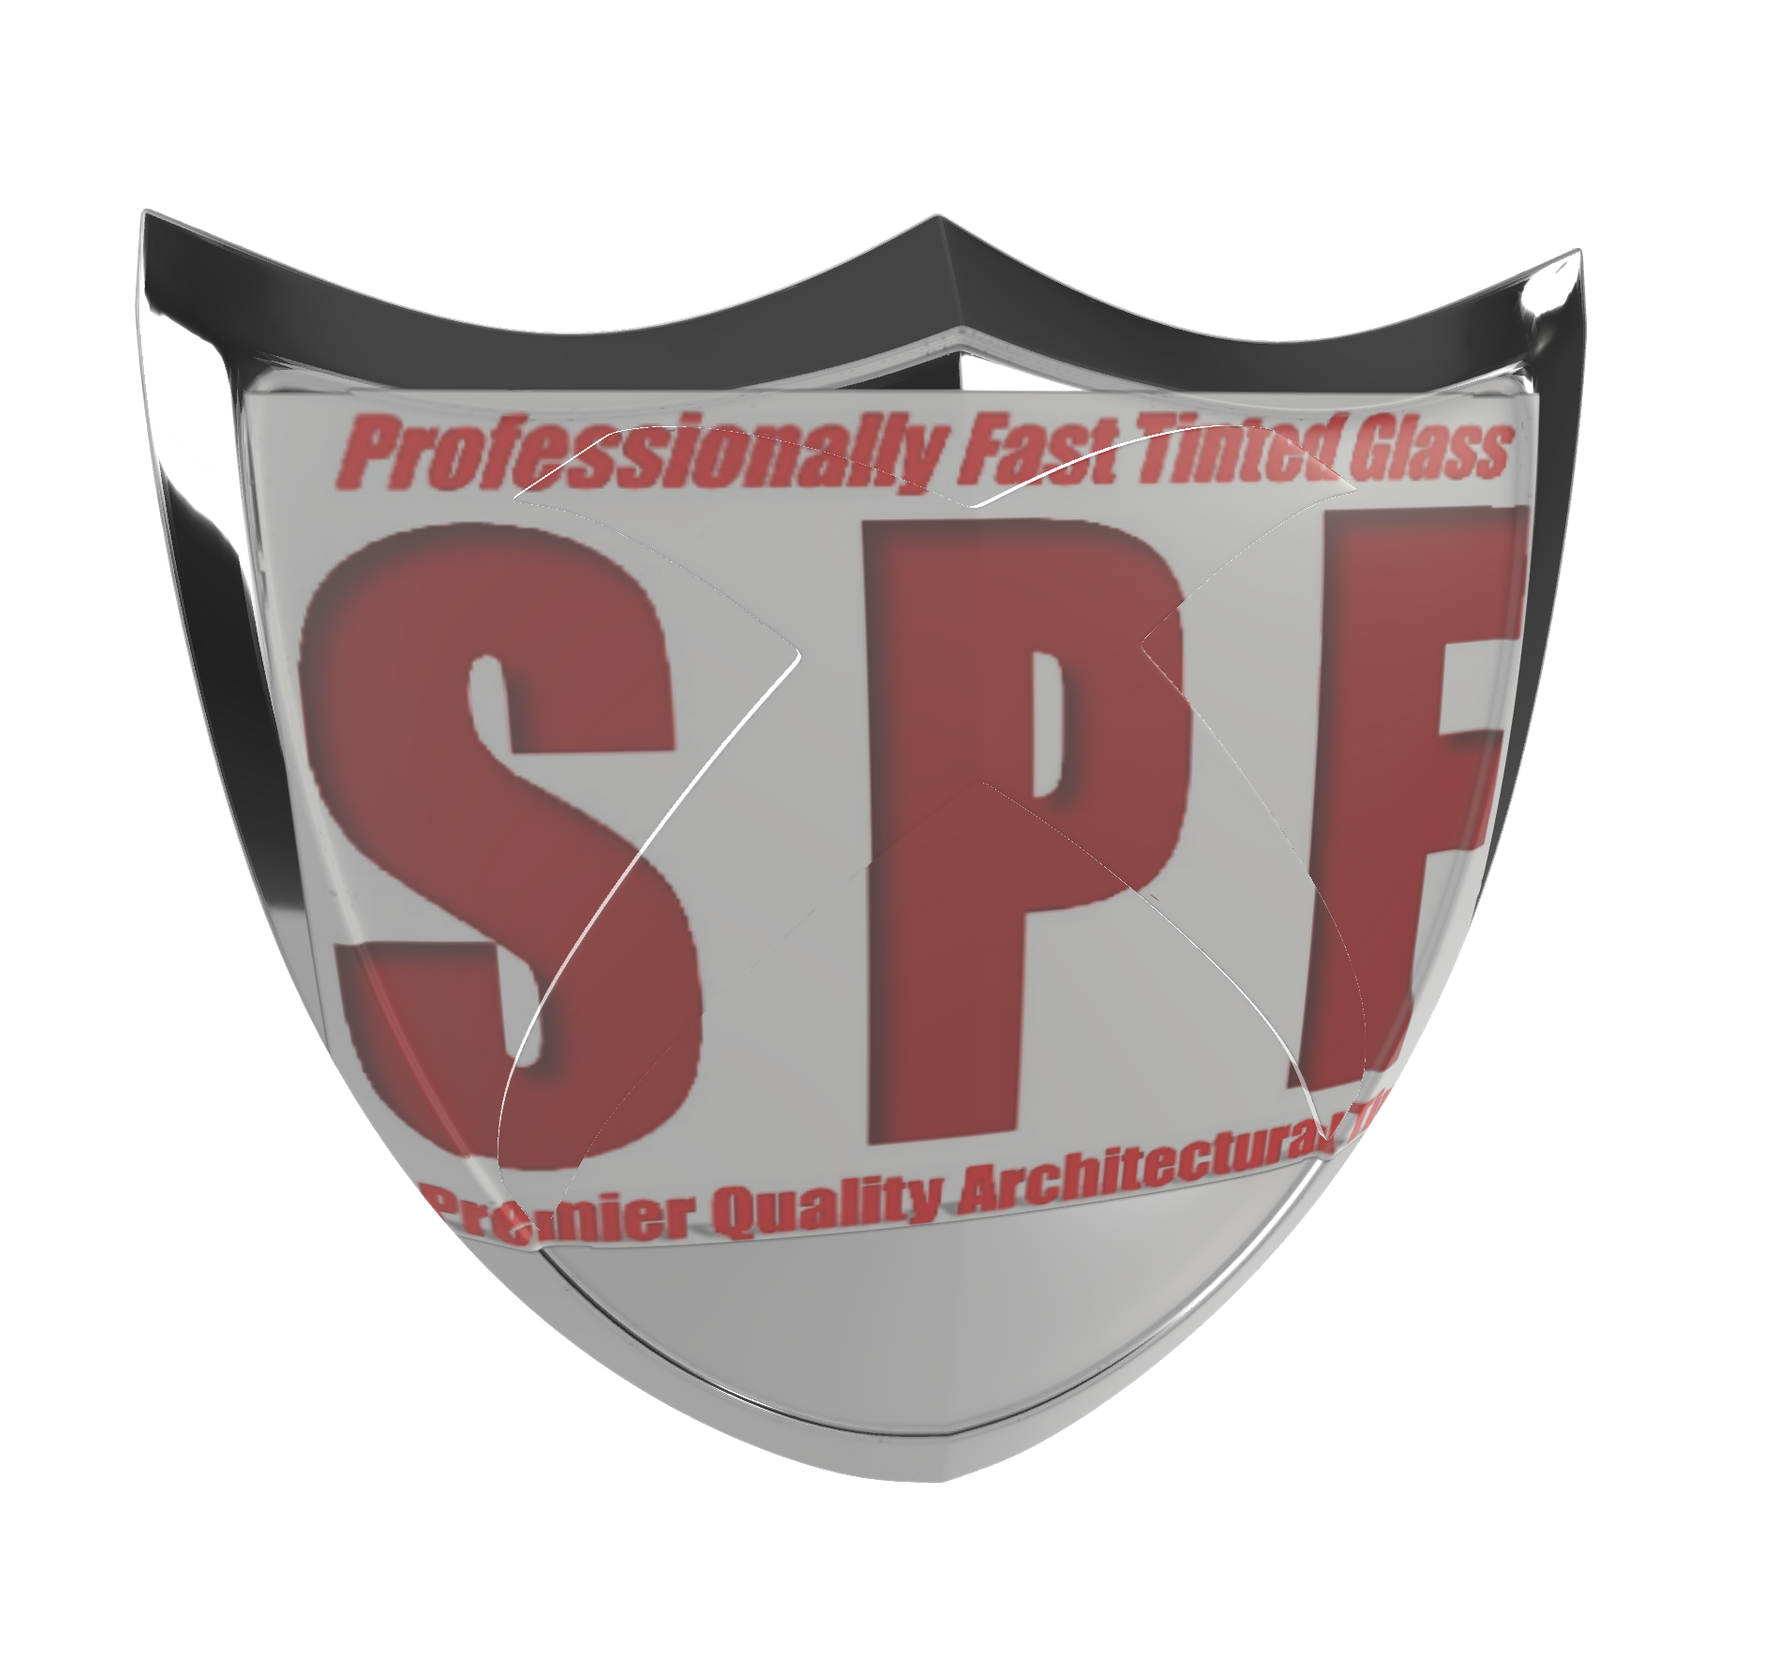 SPF Premier Quality Architectural Tint. Logo and Seal of authenticity.